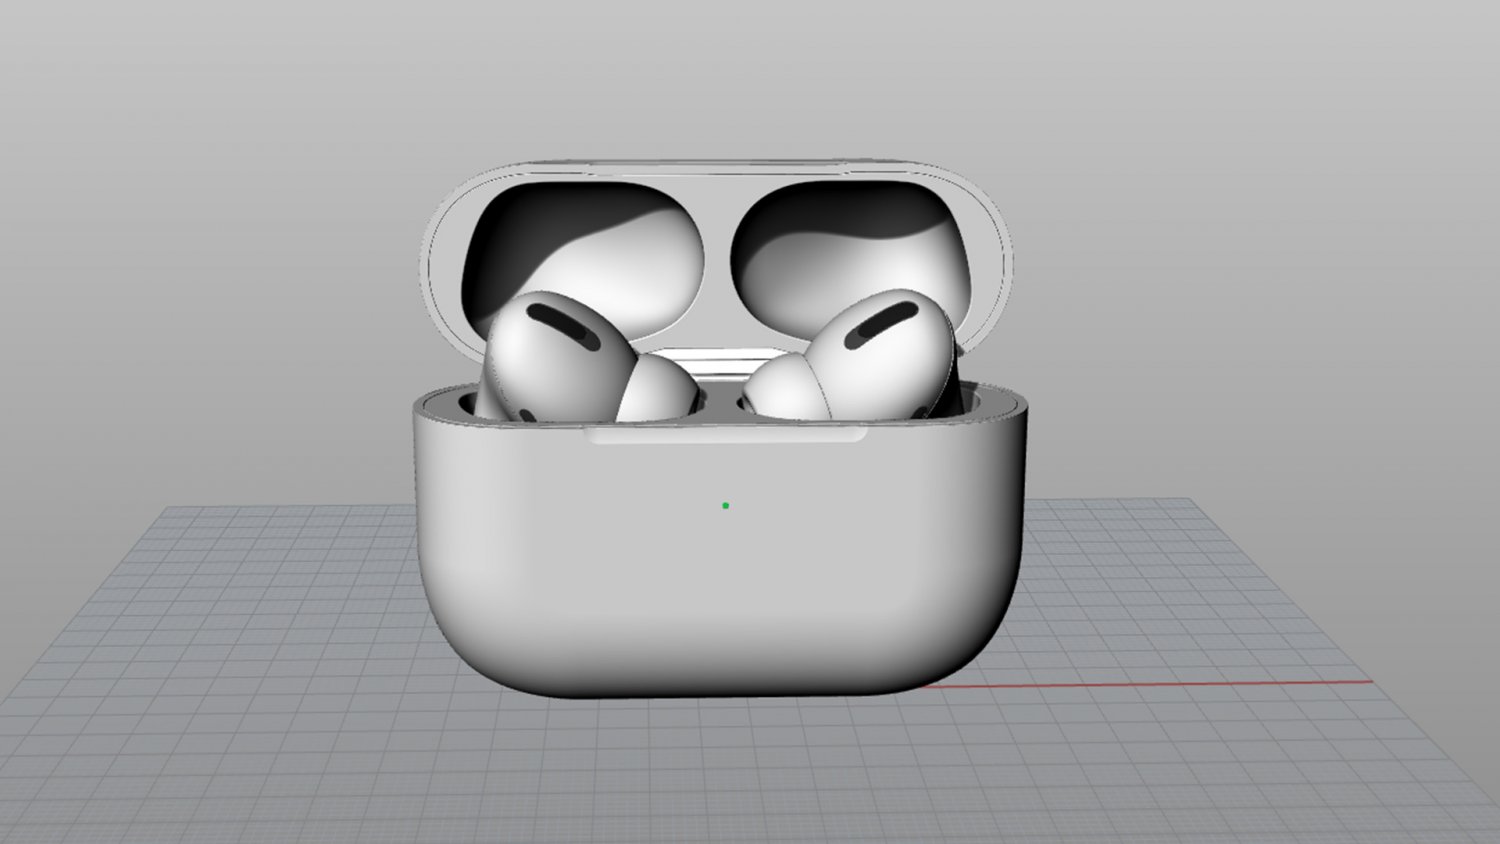 Airpods pro анимация. AIRPODS Pro 3d. AIRPODS Pro 3d model. AIRPODS Pro 3. AIRPODS Pro 2 3d model.